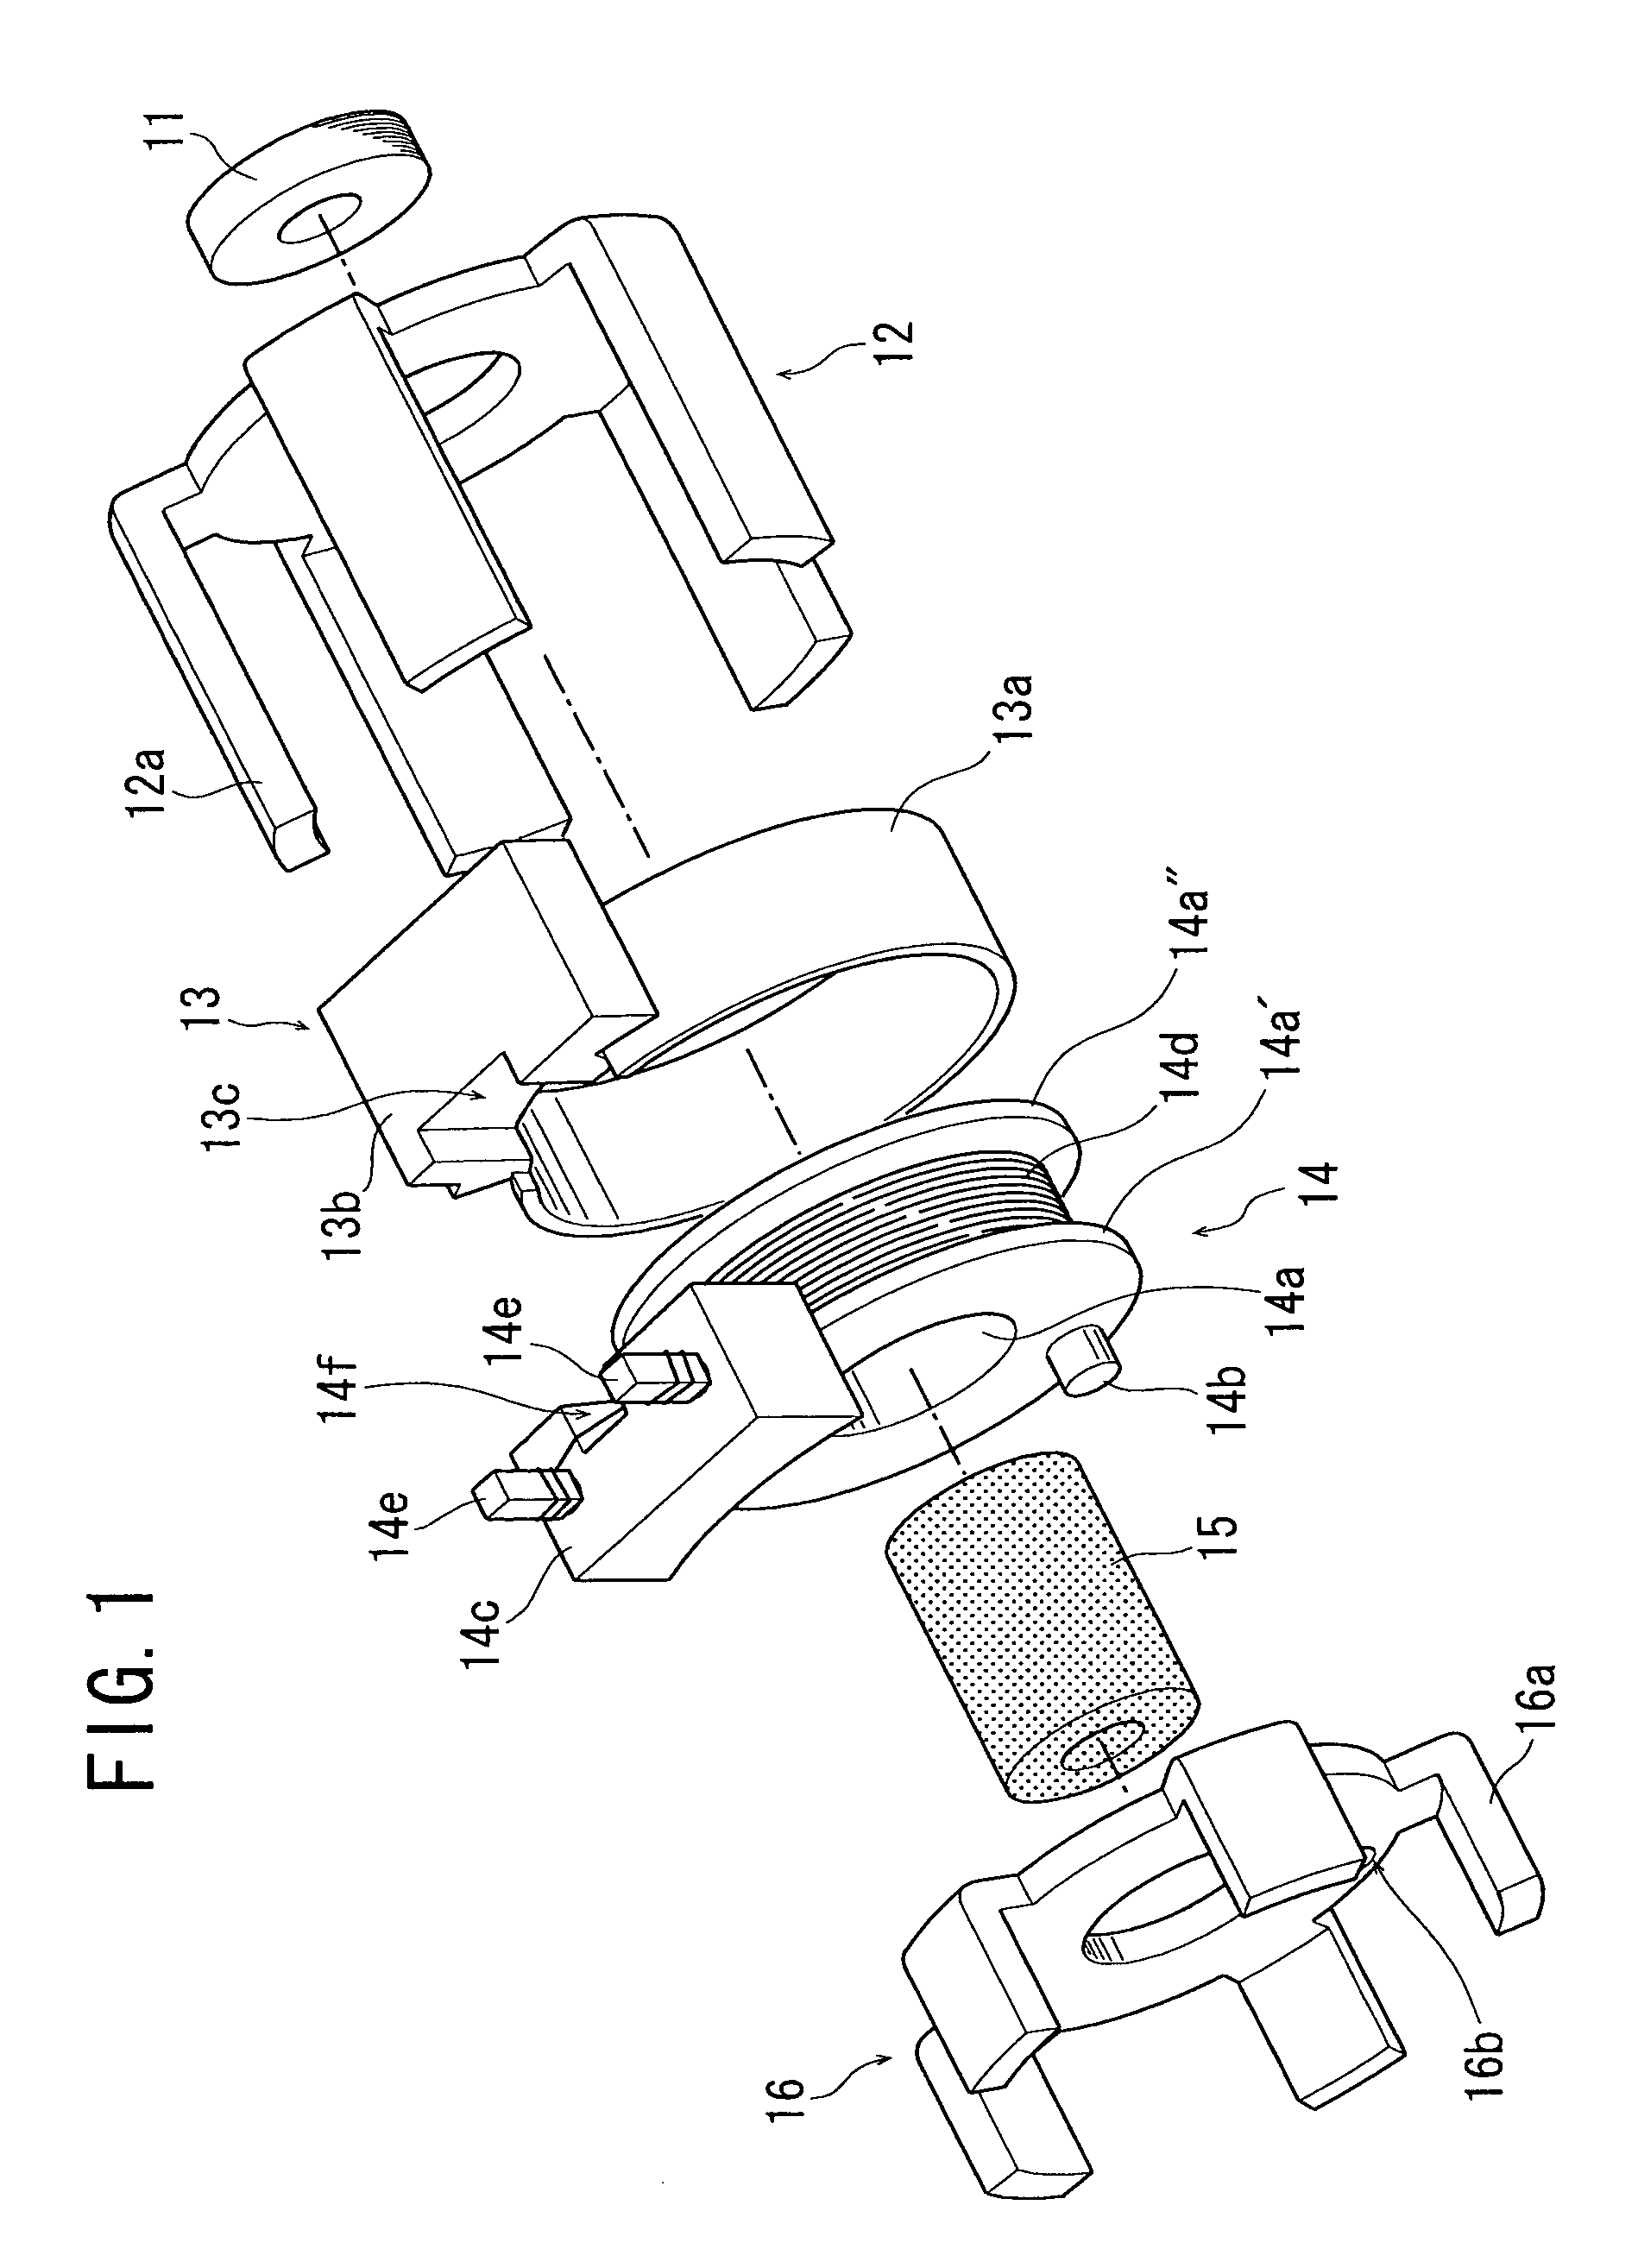 Claw-pole type stepping motor